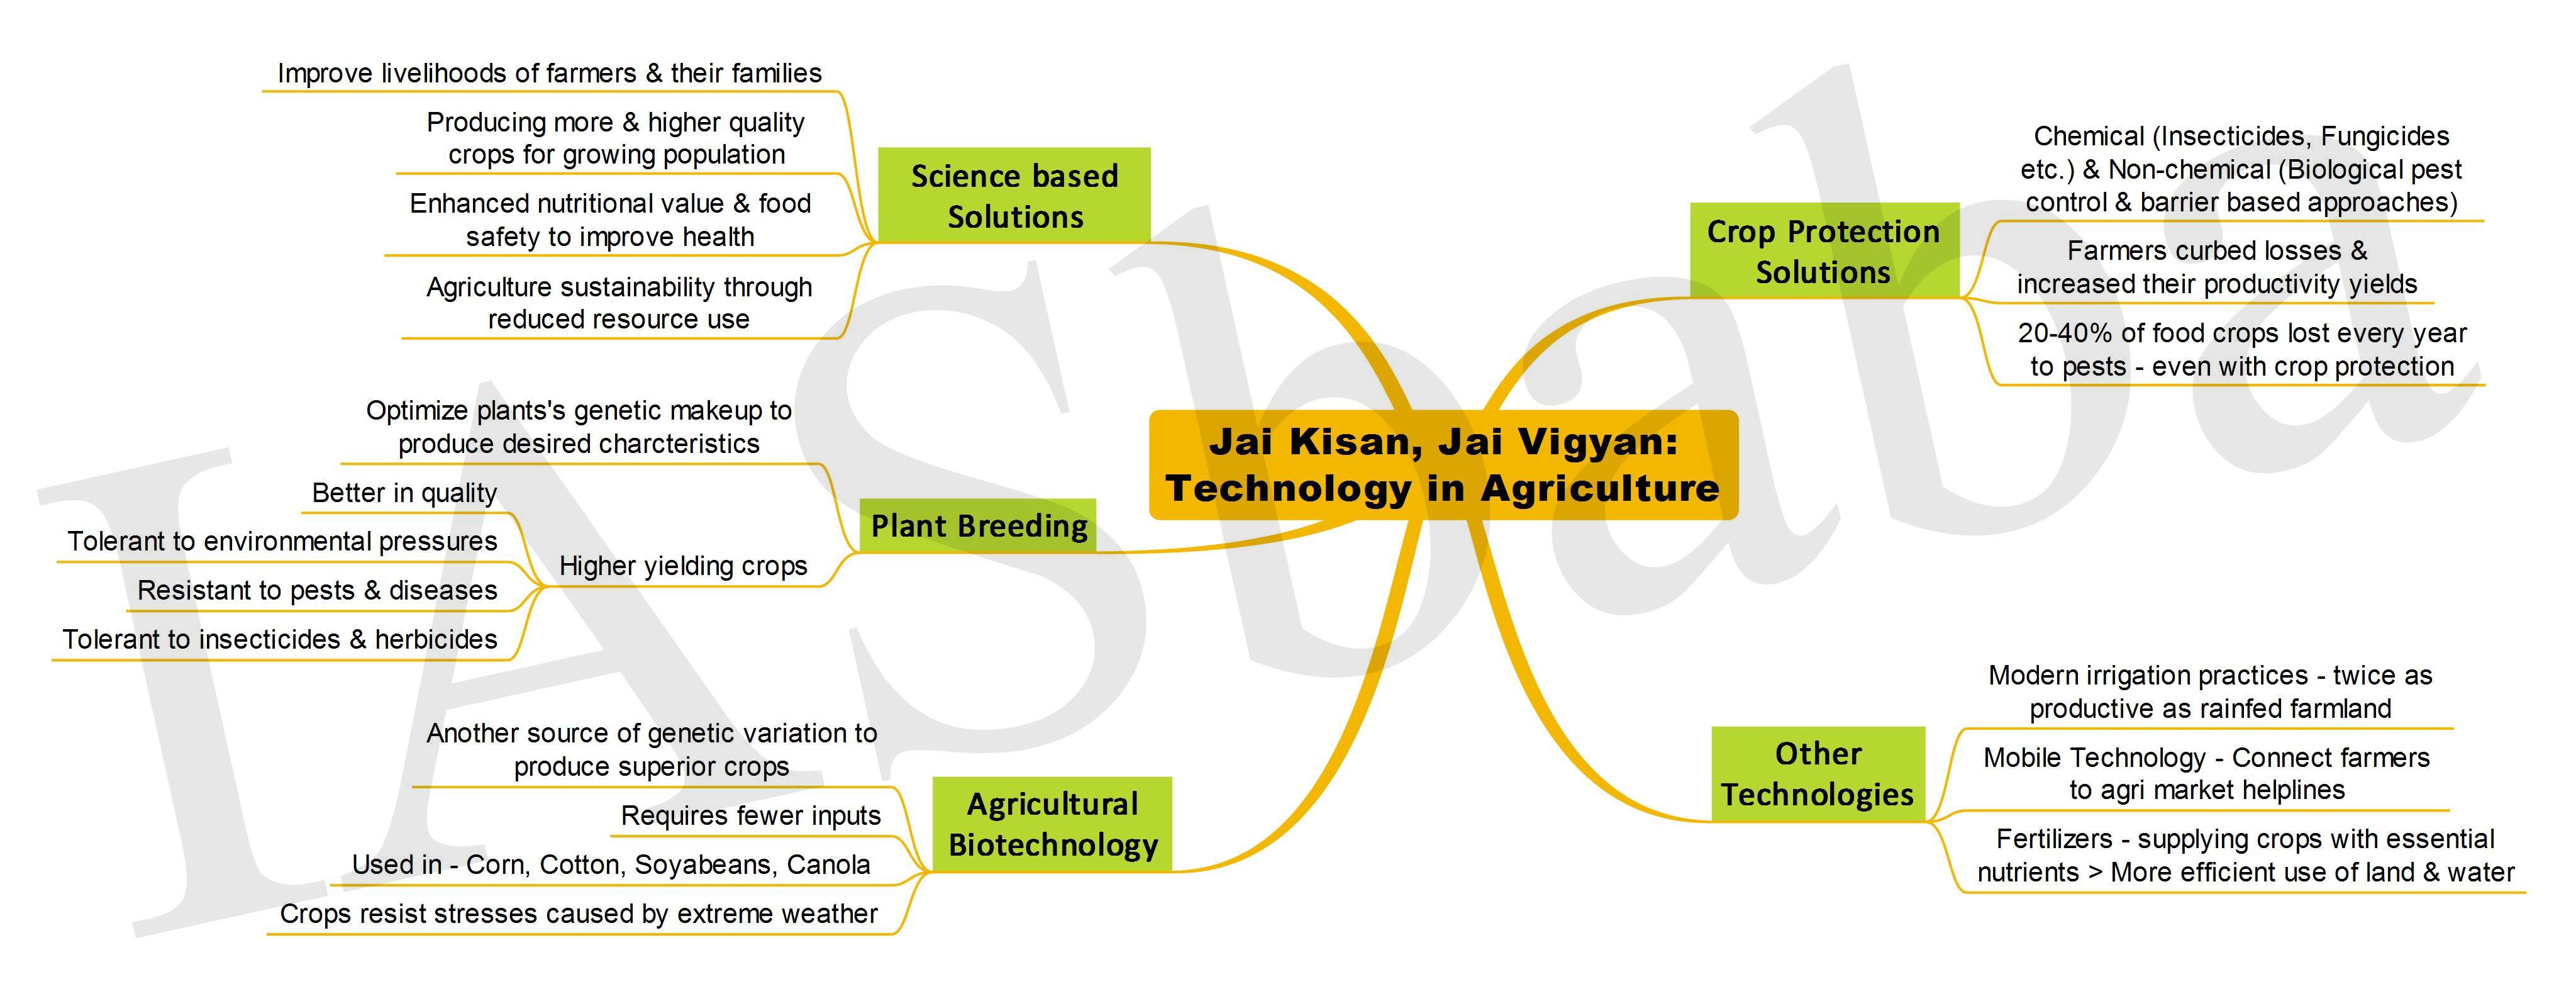 current technology uses and applications in agriculture